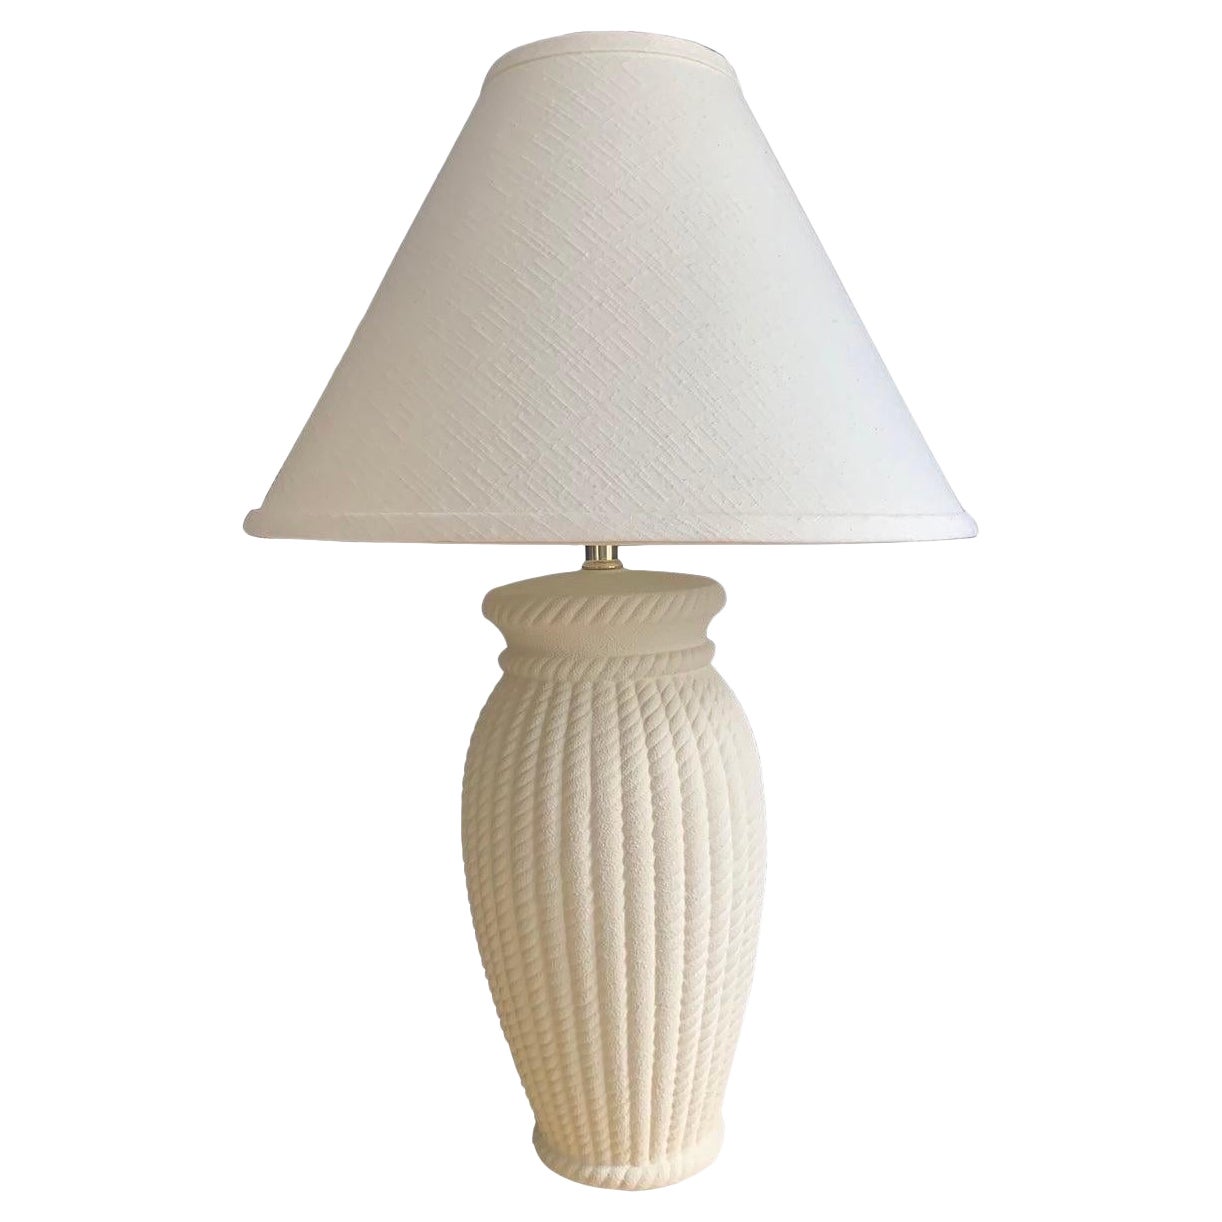 Vintage Postmodern White Ceramic Braided Rope Lamp With Shade For Sale